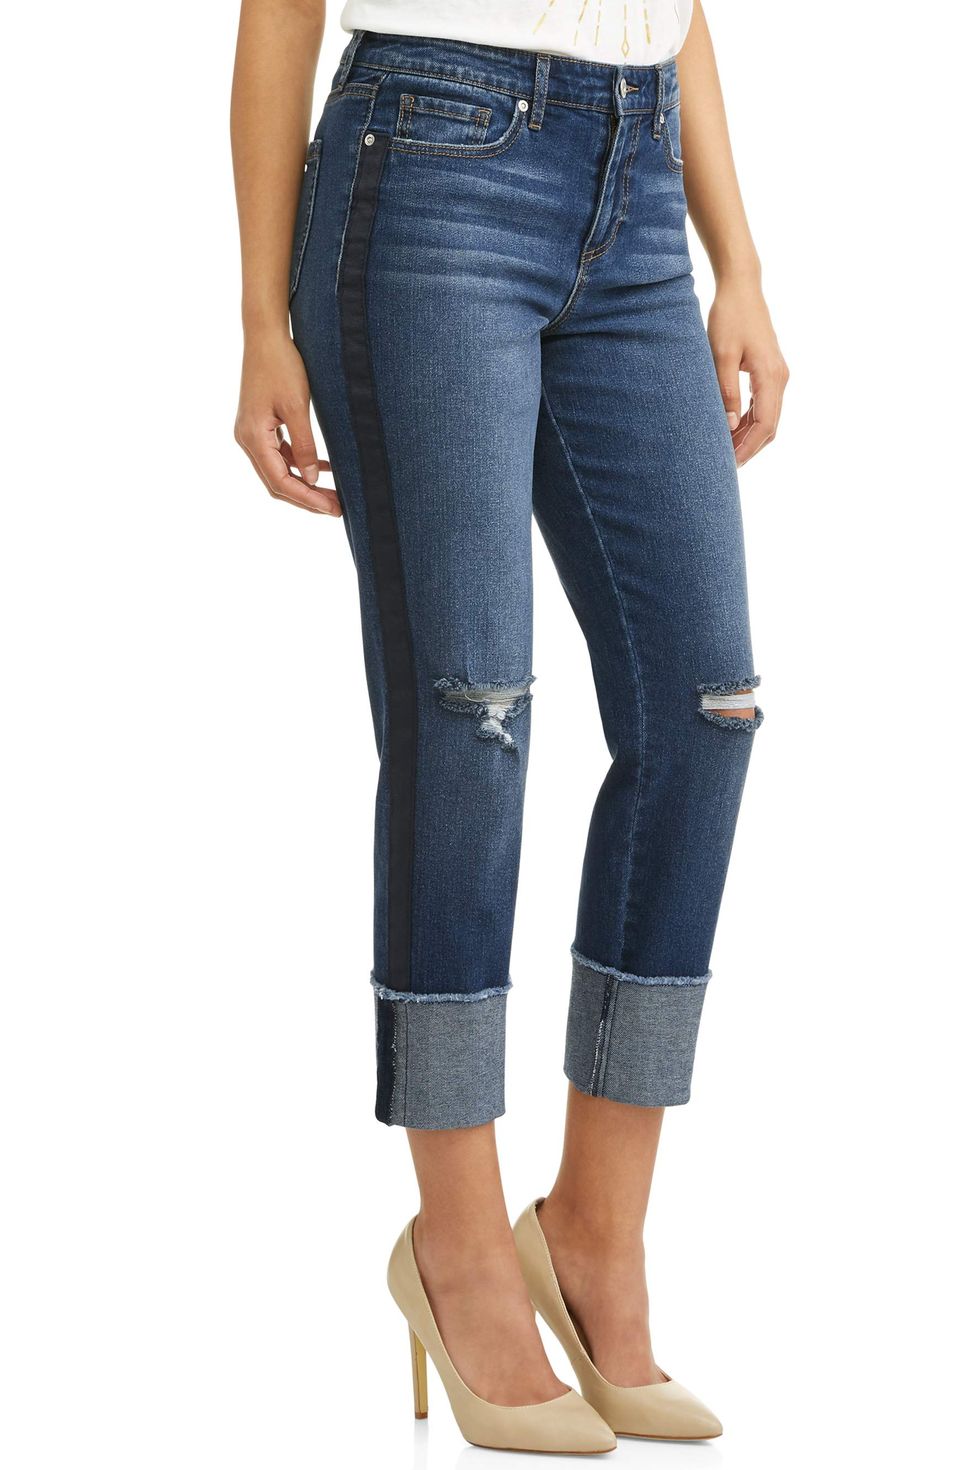 Sofía Jeans by Sofía Vergara﻿﻿ at Walmart Are Size-Inclusive and Super  Affordable